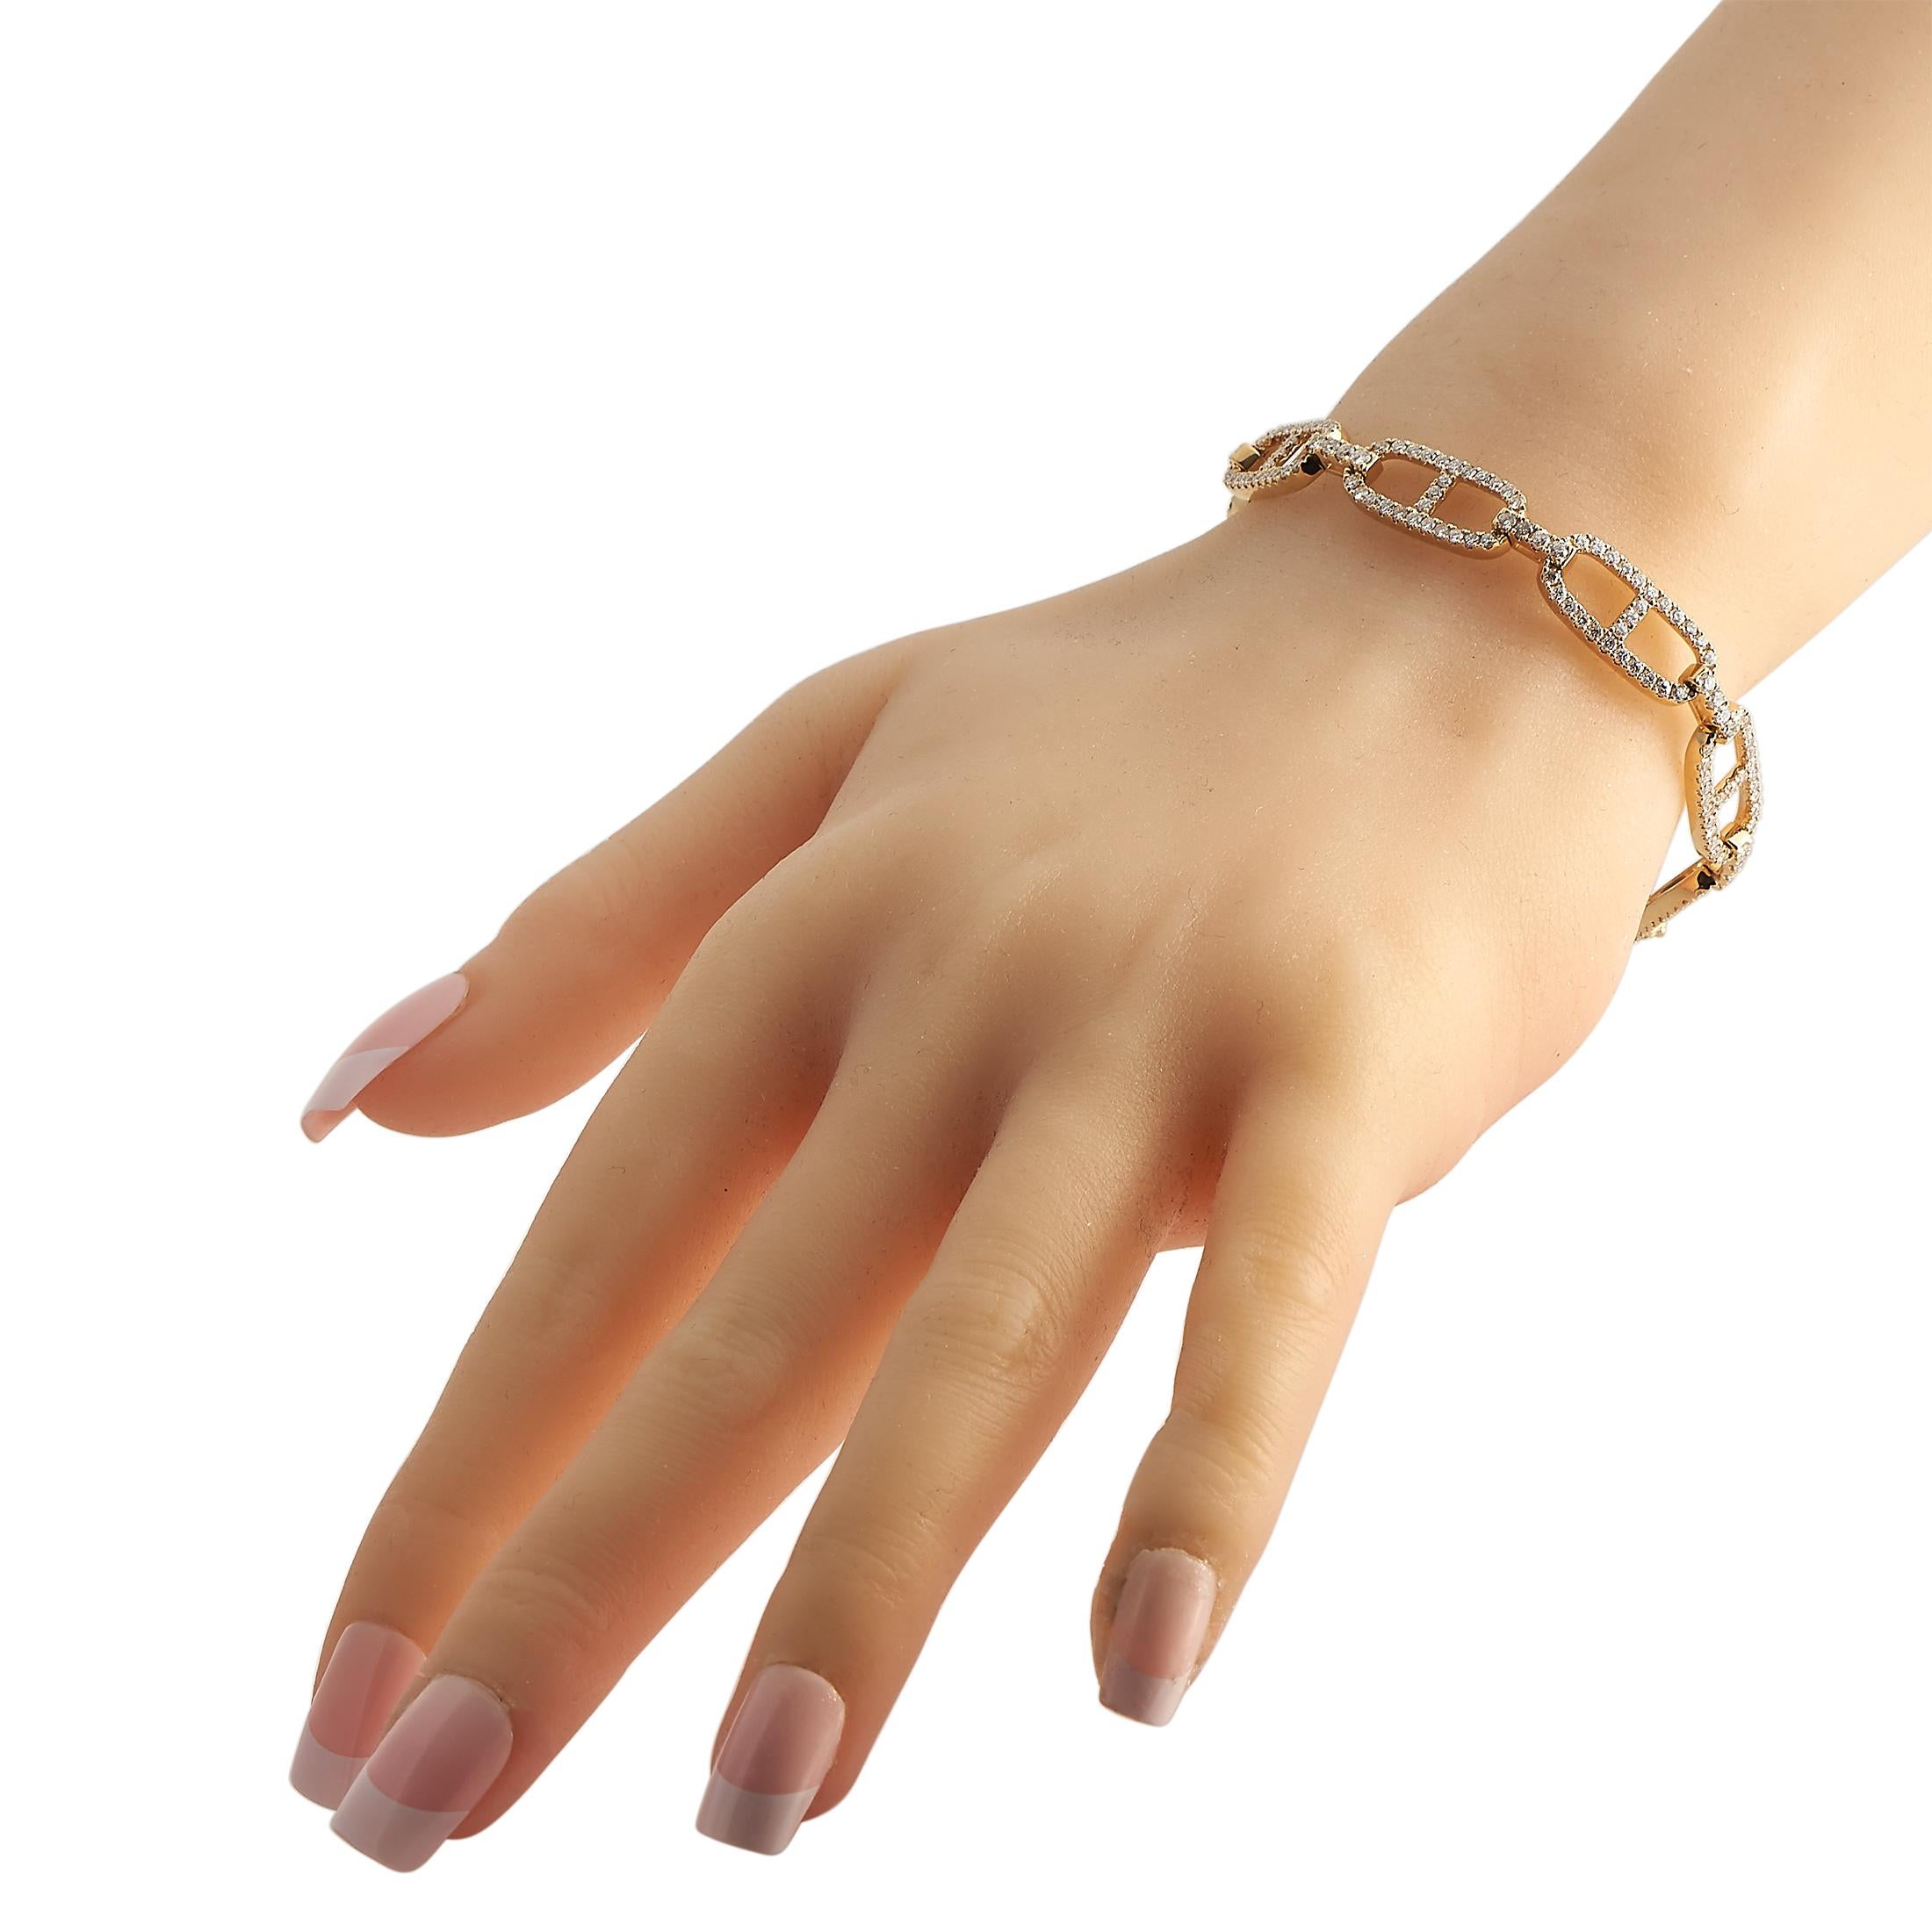 This 18K Yellow Gold bracelet possesses an understated elegance. Ideal for everyday wear, Diamonds with a total weight of 3.85 carats allow it to sparkle and shine along with every move you make. It measures 7.25 long and comes complete with secure